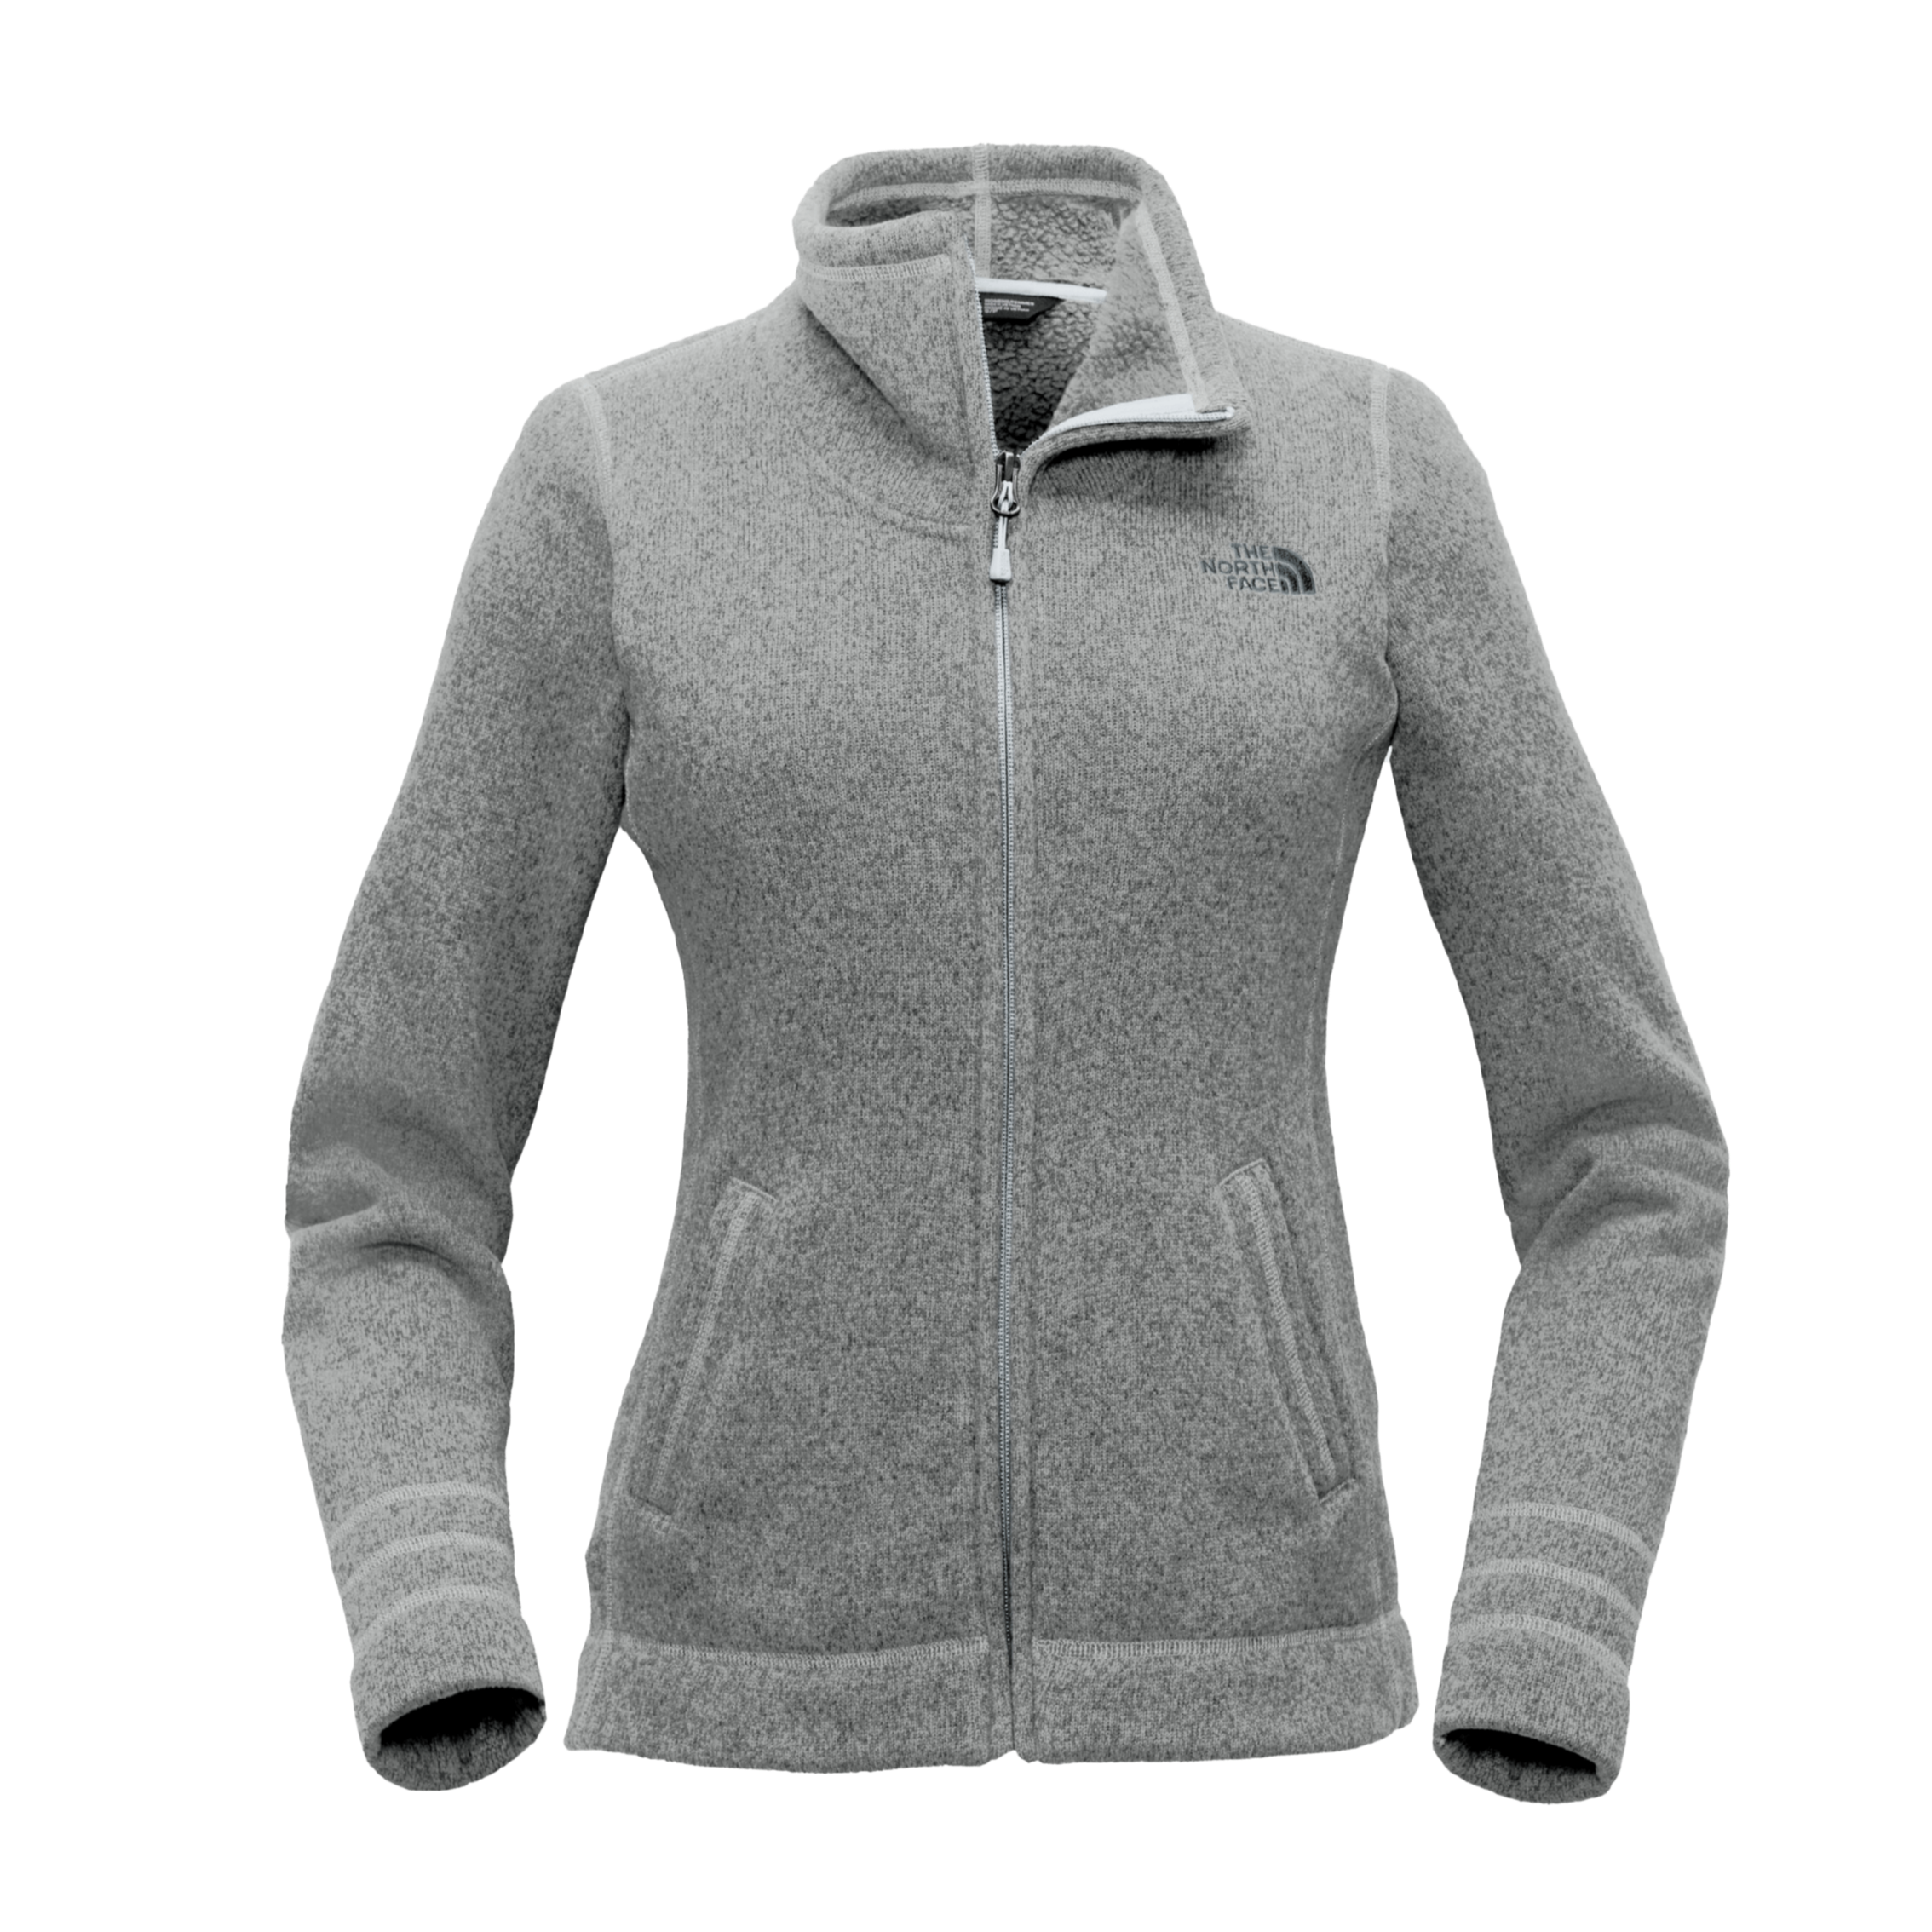 The North Face Sweater Jacket | Custom Corporate Jacket | C&T – & Twine